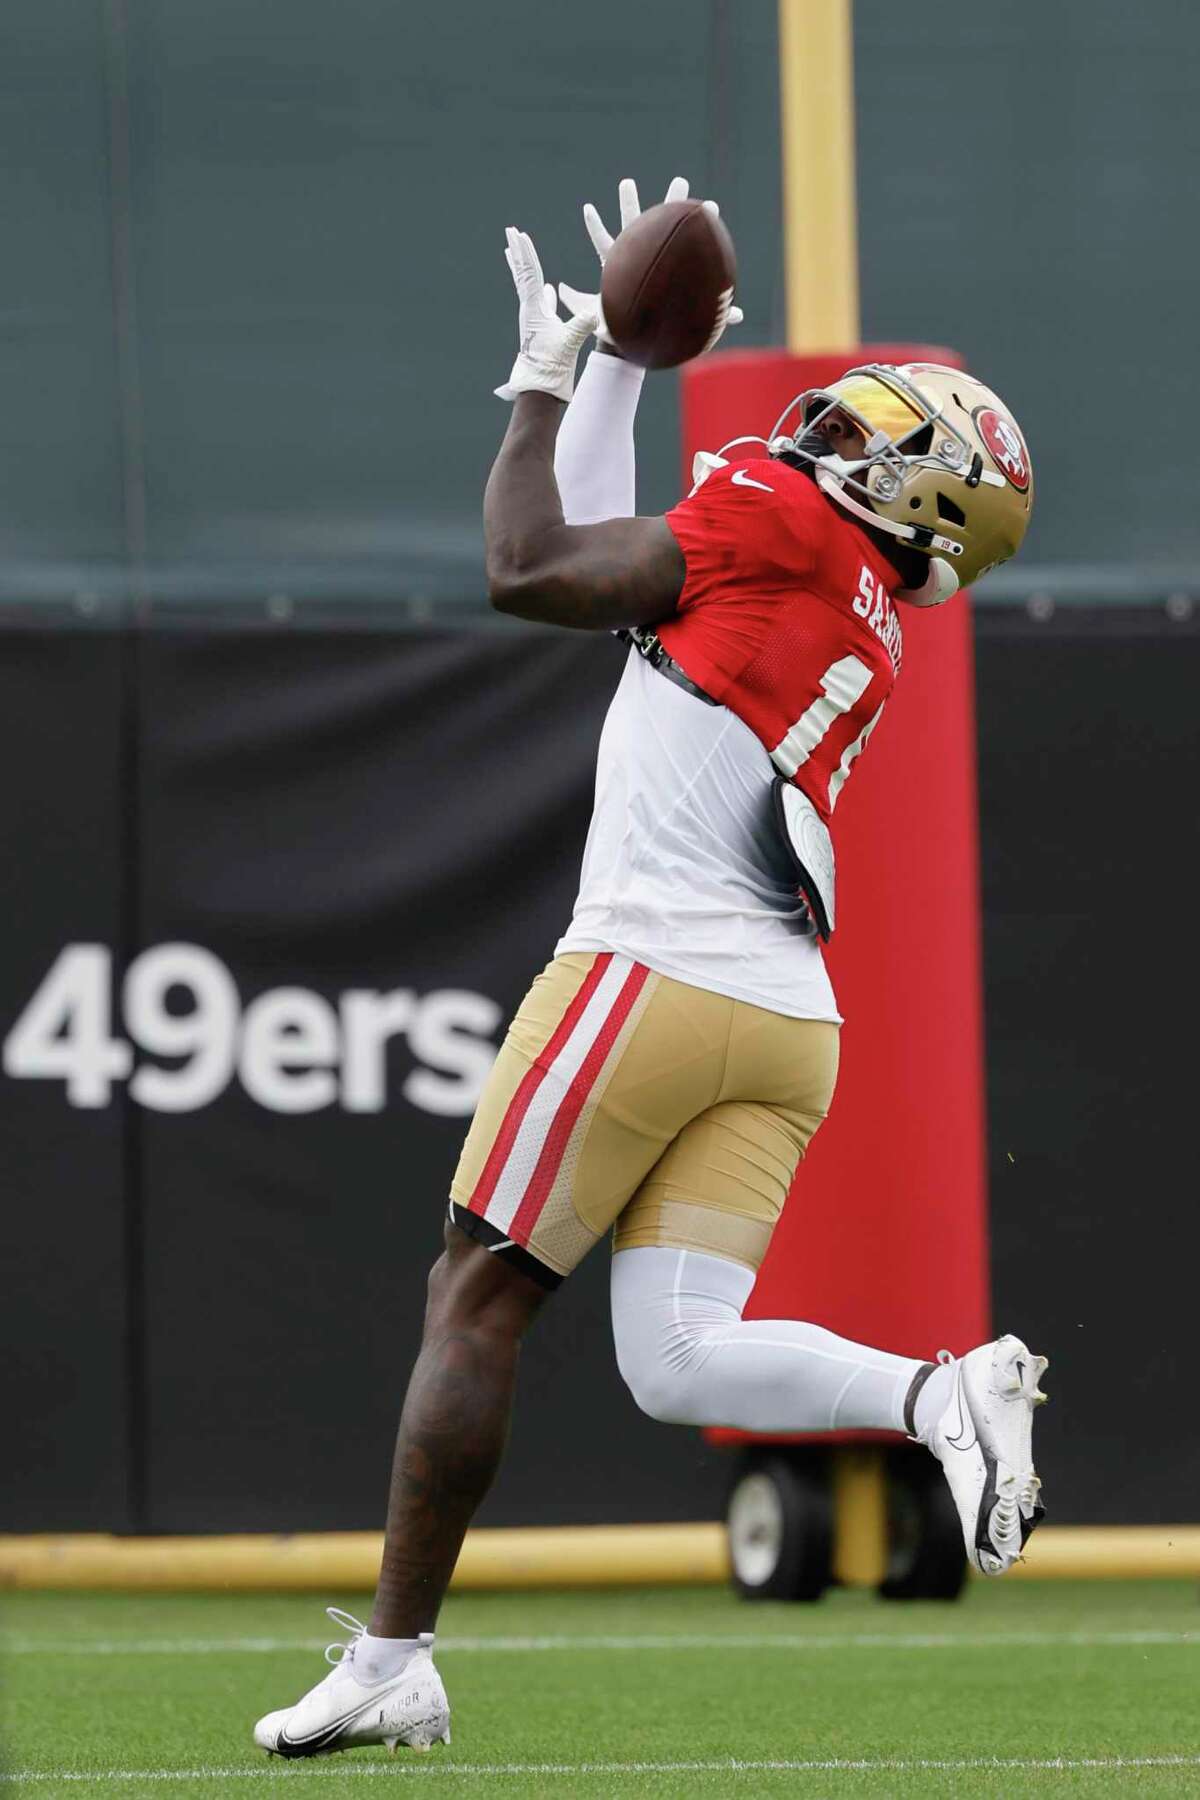 49ers wide receiver Deebo Samuel reaches for a pass during training camp in Santa Clara on Monday.